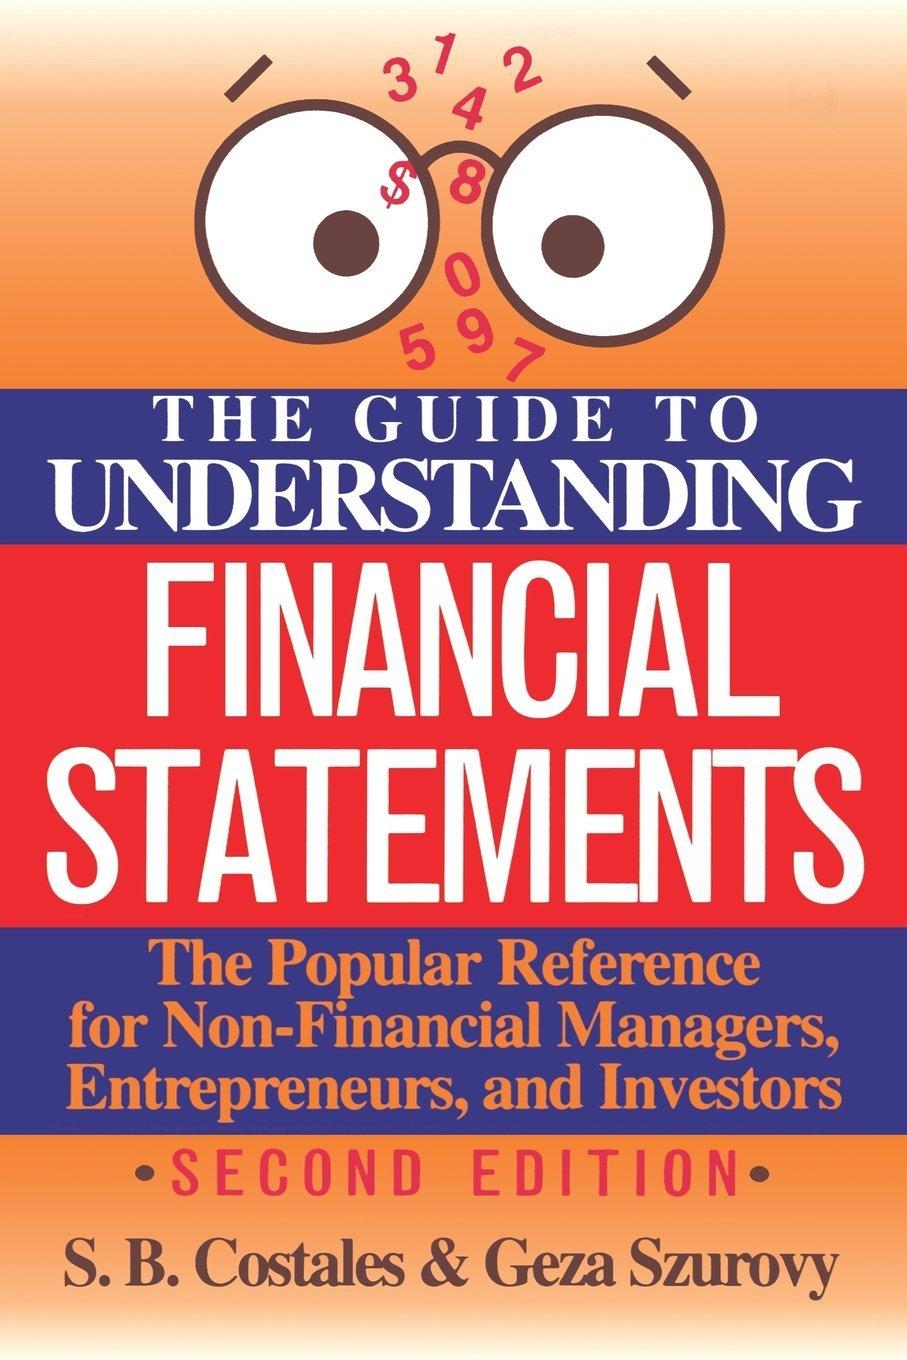 the guide to understanding financial statements 1st edition geza szurovy, s. costales 007013197x,